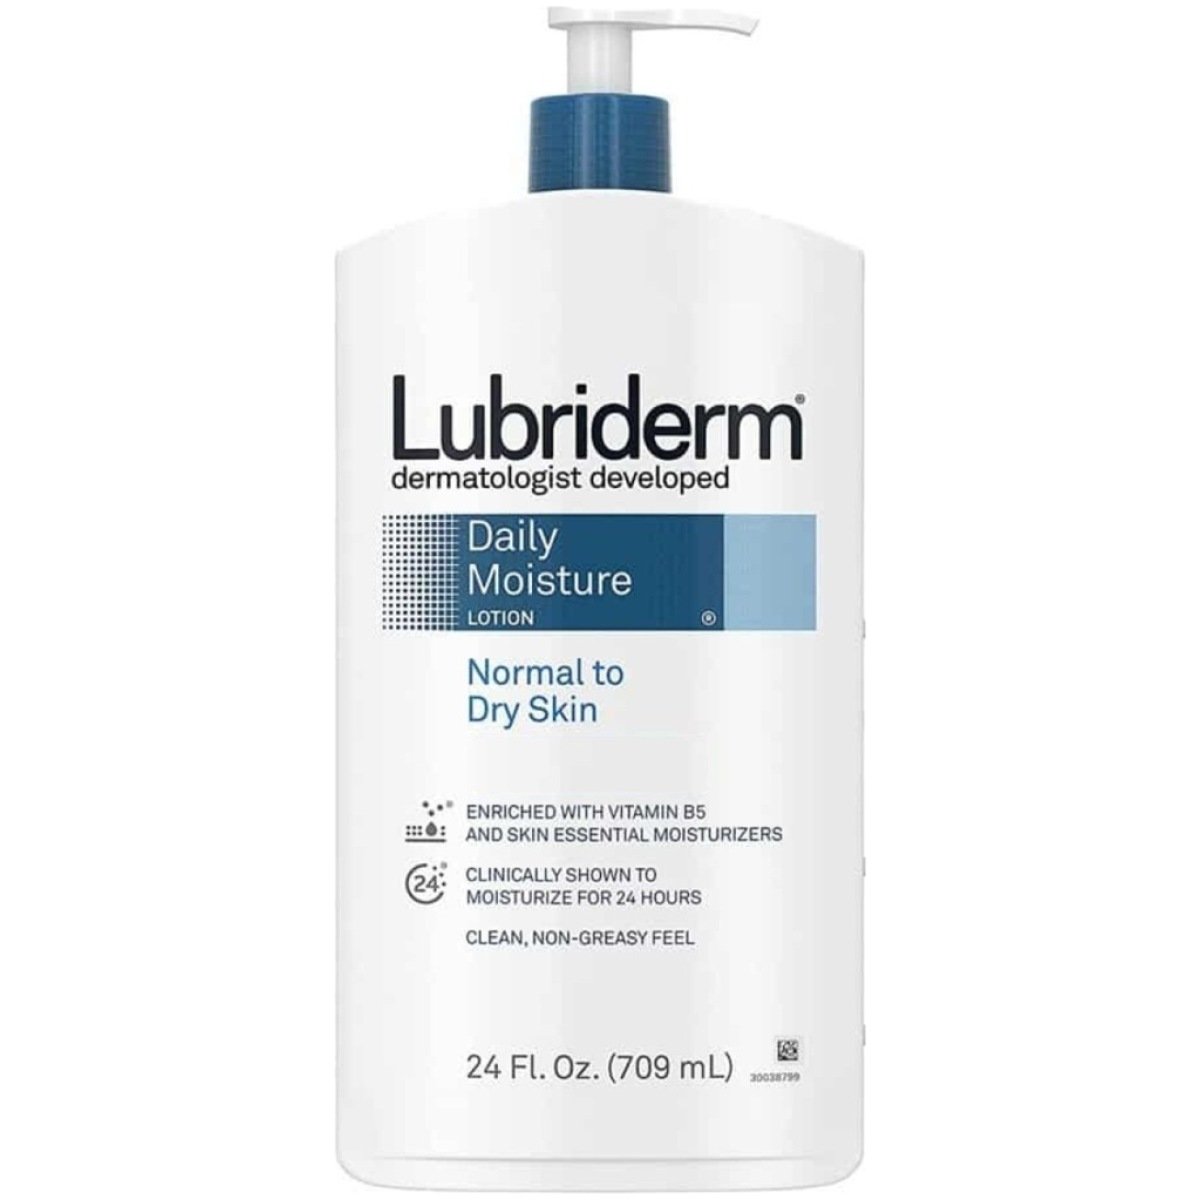 Lubriderm-Daily-Moisture-Lotion-Normal-To-Dry-Skin-709ml